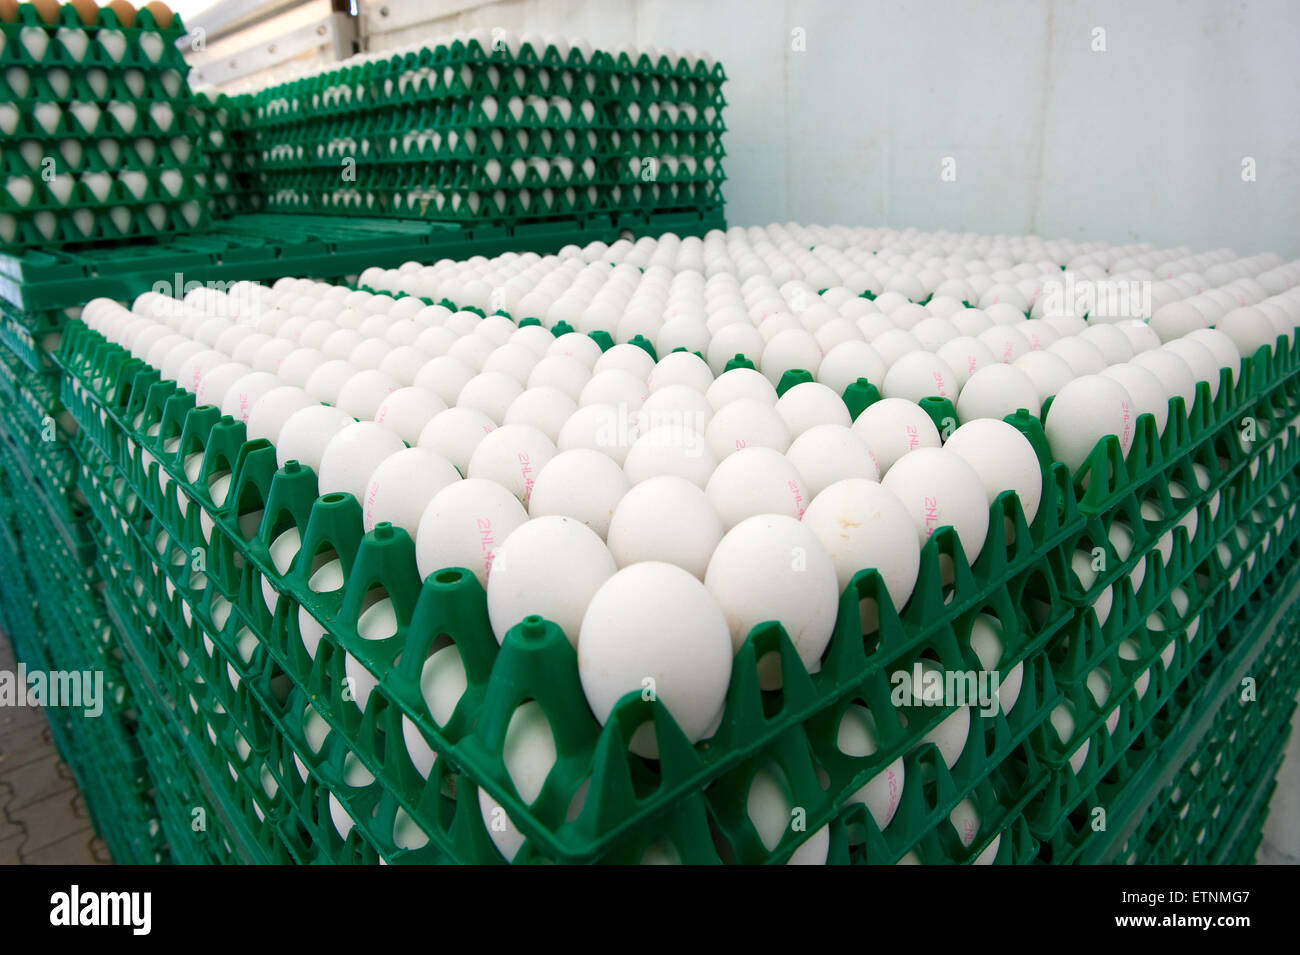 White eggs in green plastic crates ready to be transported from a chicken farm Stock Photo